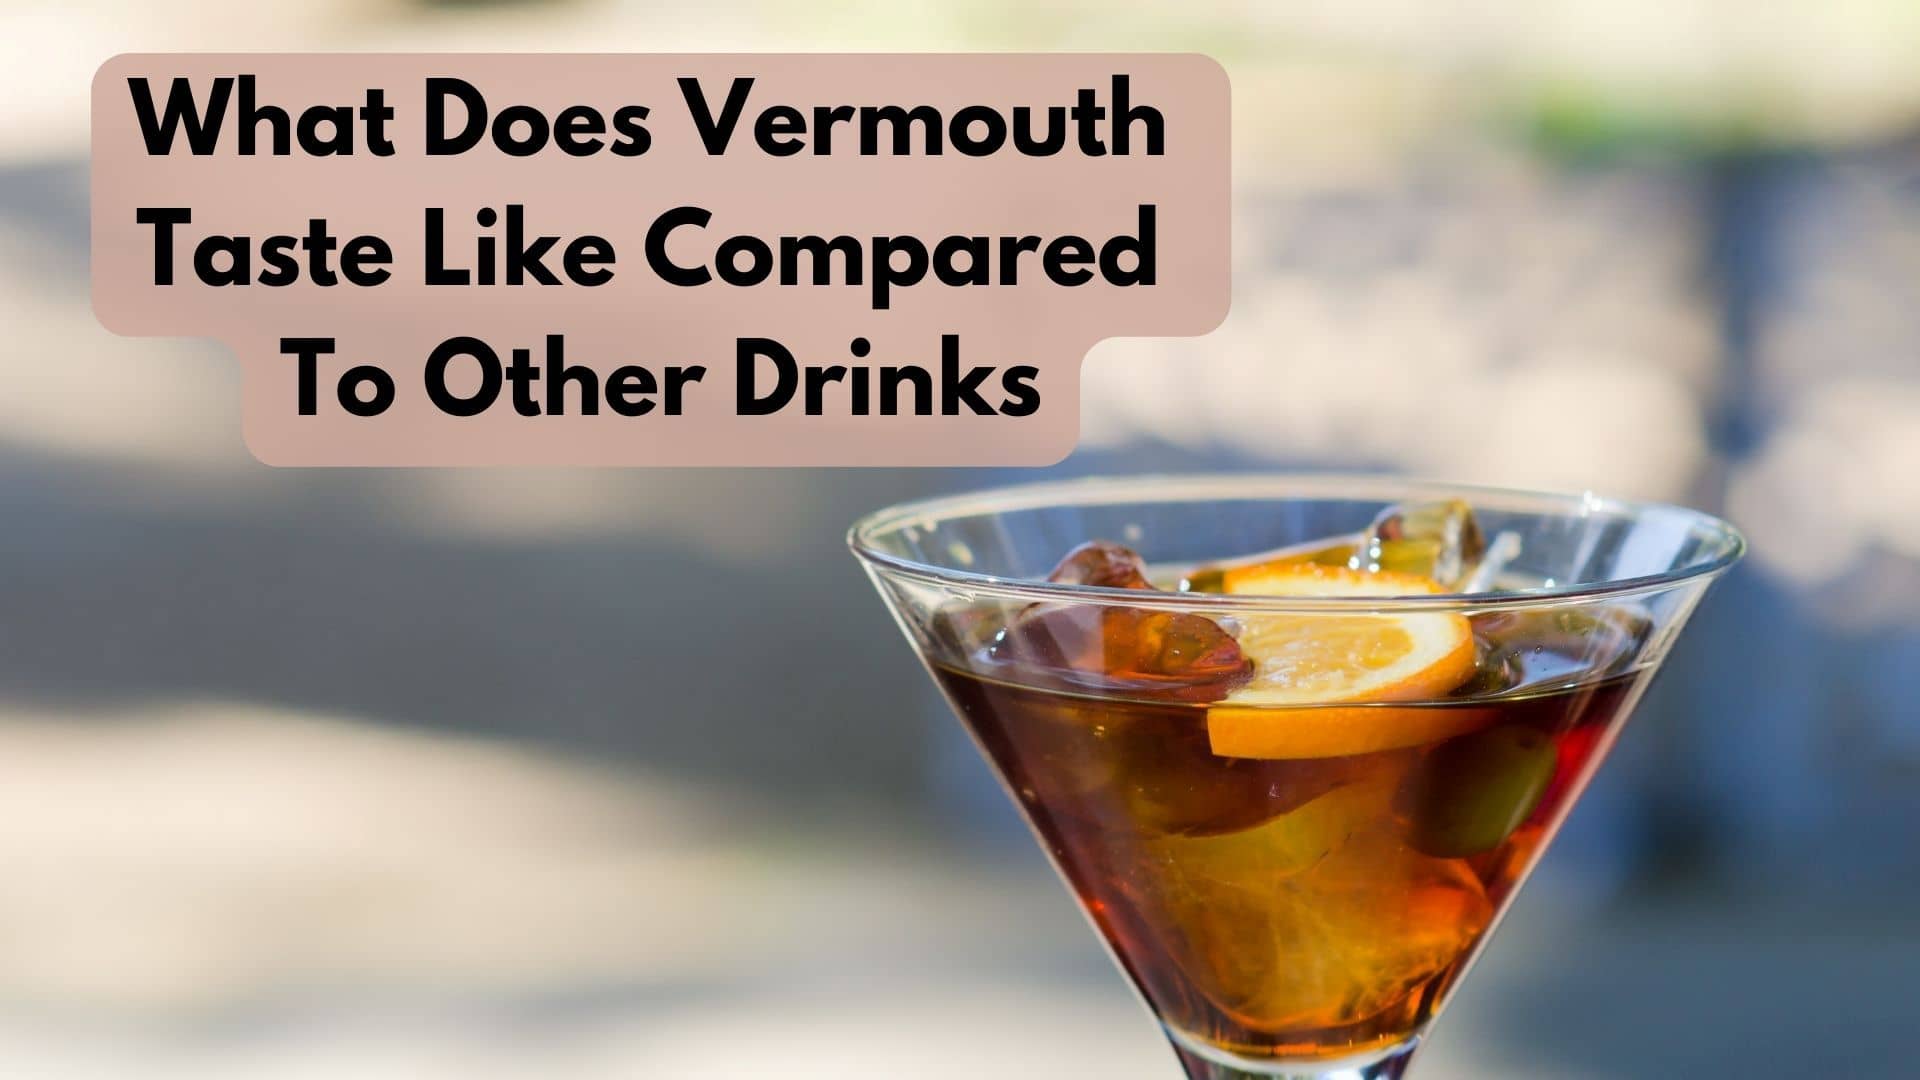 What Does Vermouth Taste Like Compared To Other Drinks?